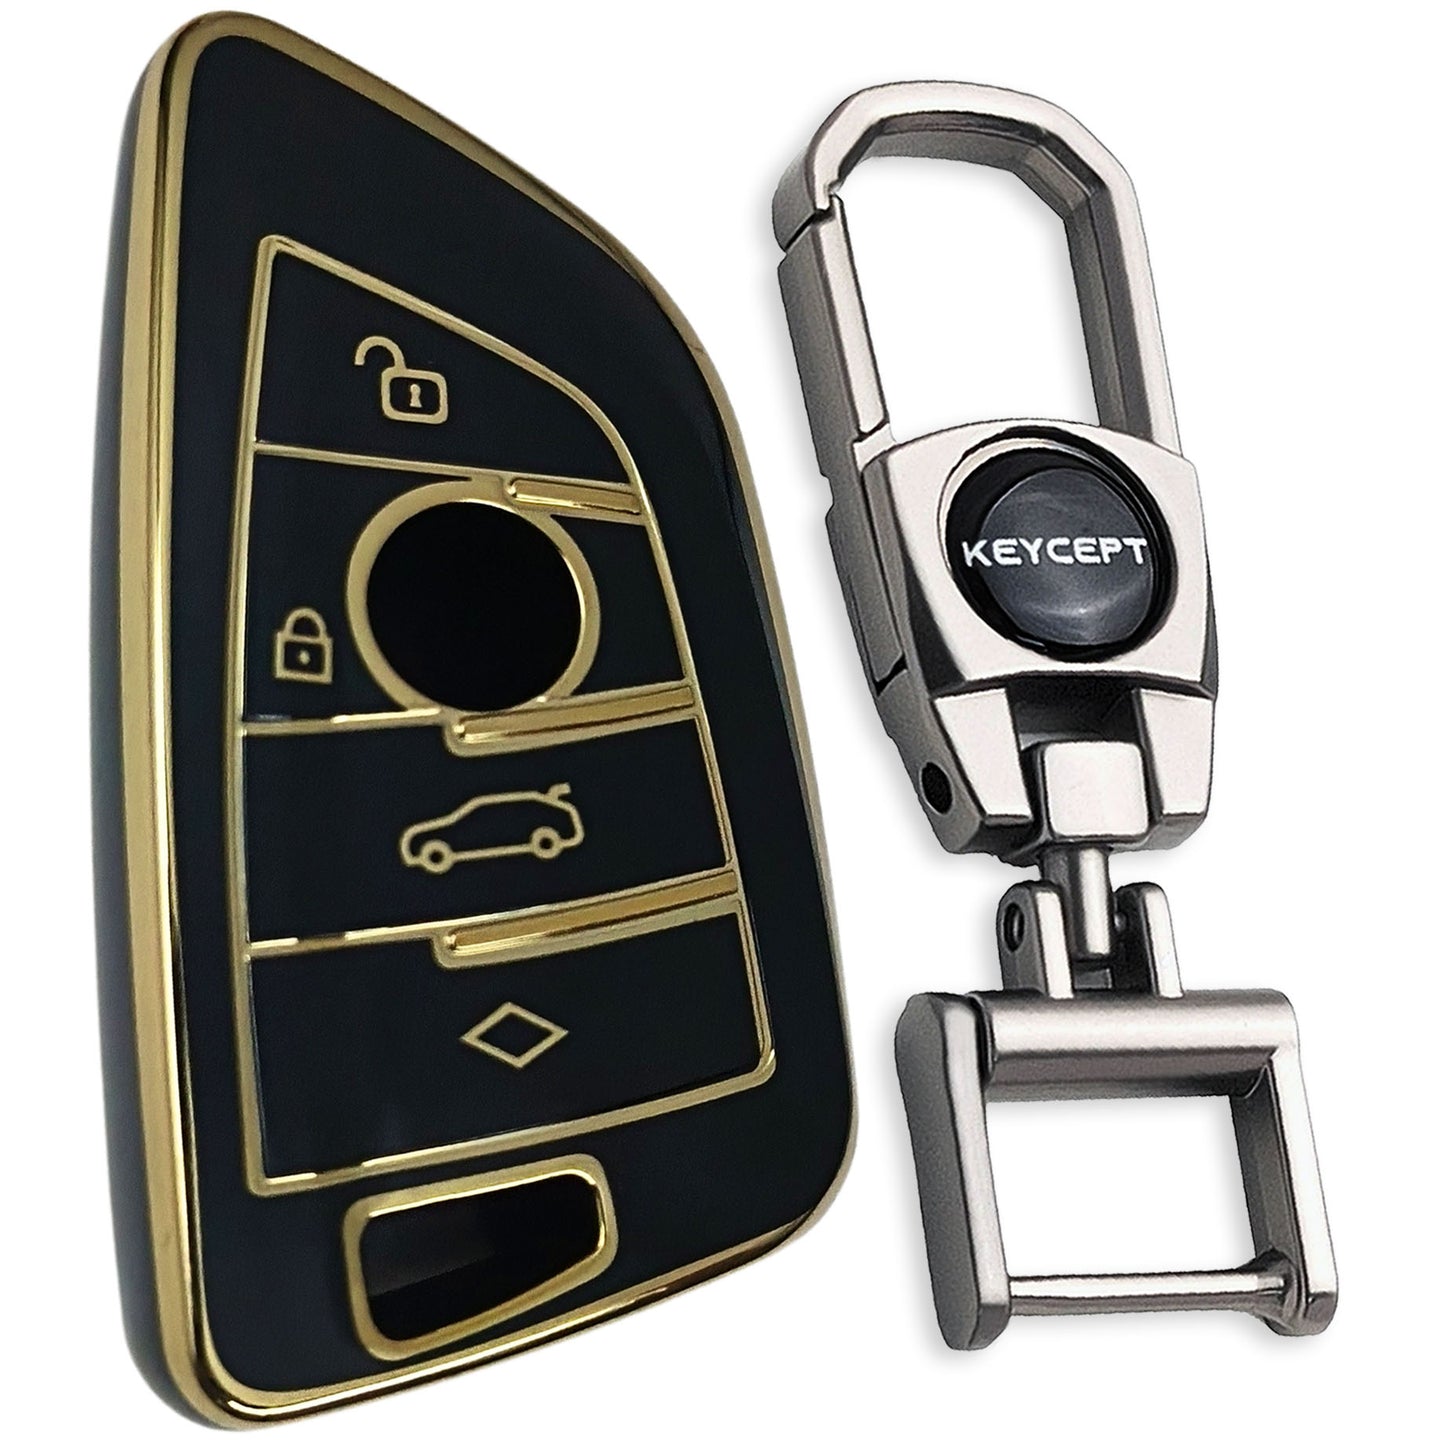 TPU Key Cover for BMW X-Series | M-Series | 3-Series | 5-Series | 7-Series 4 button smart key with Keychain 2